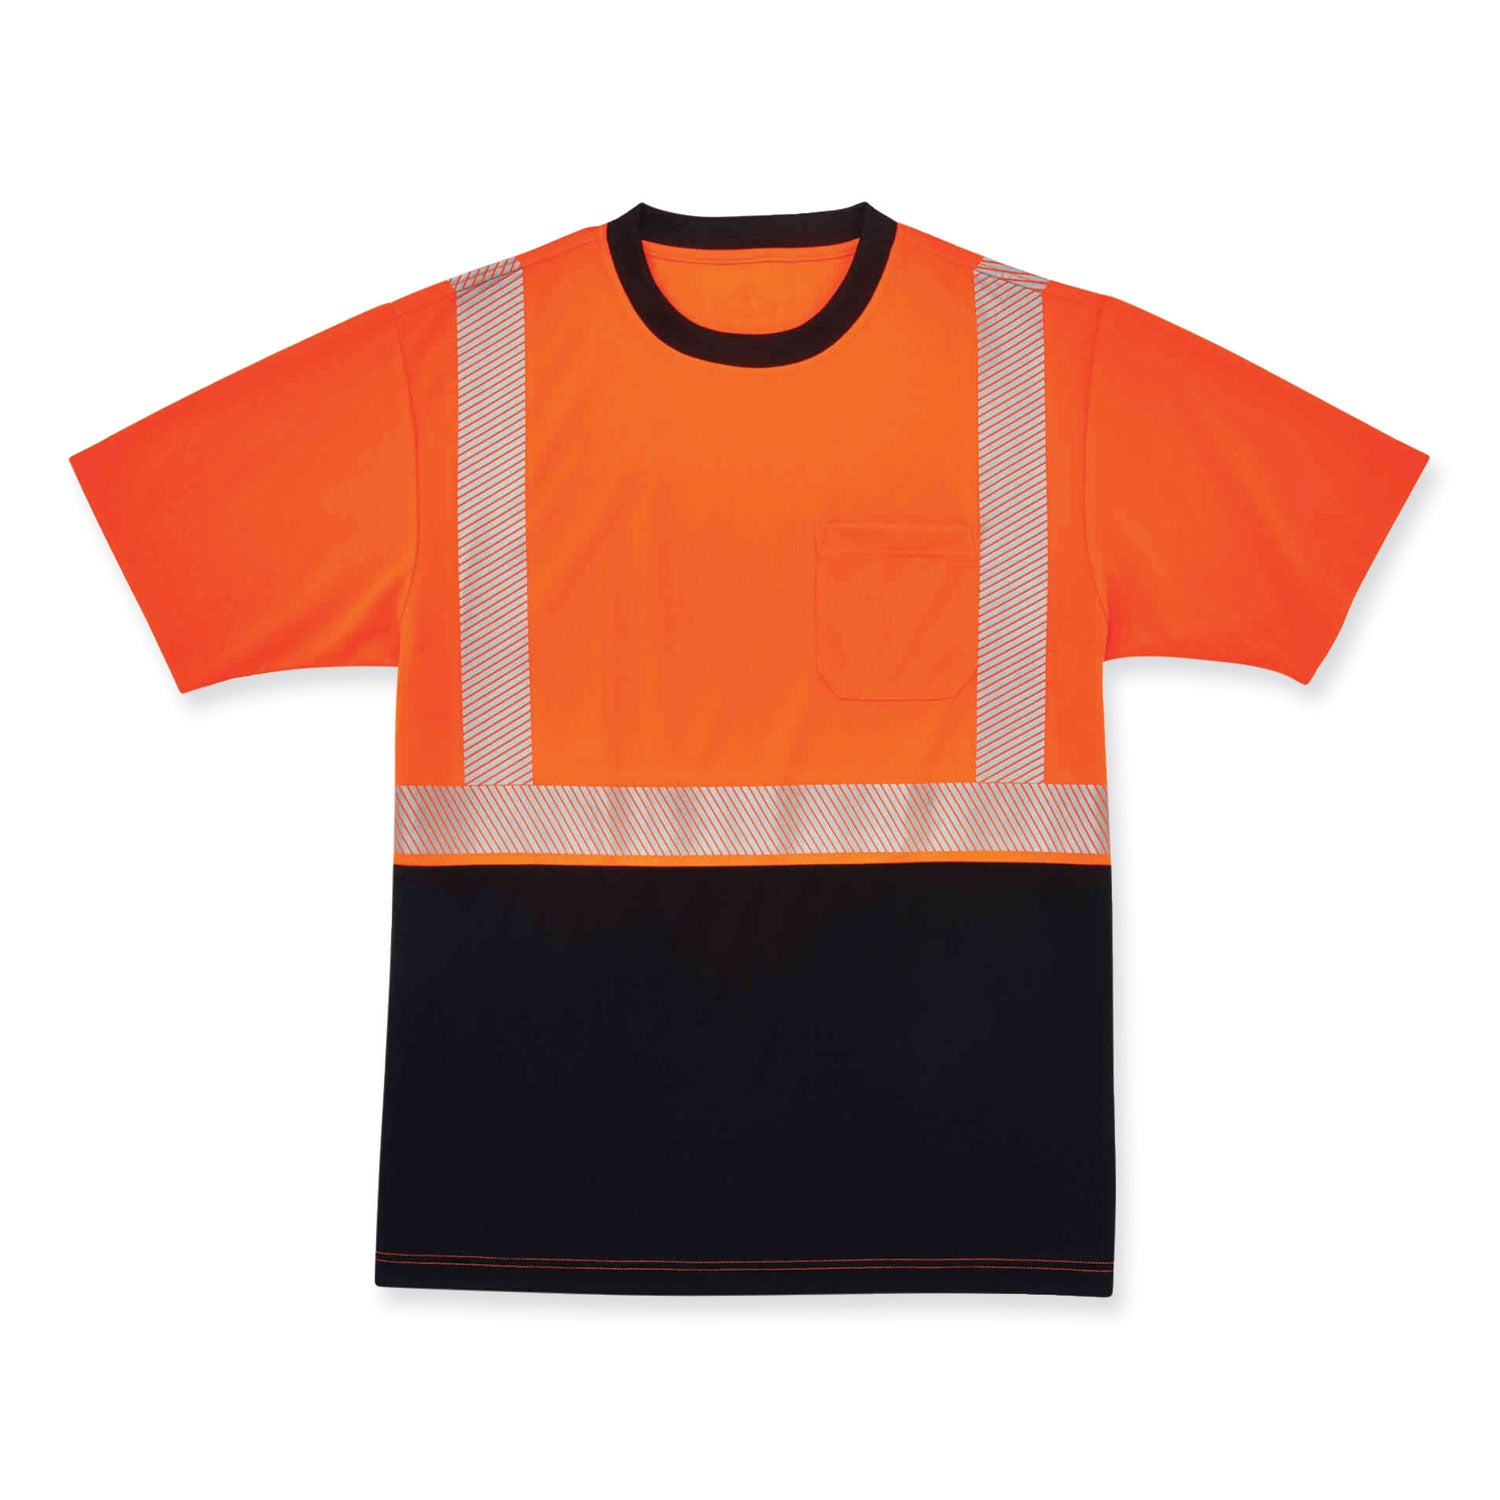 glowear-8280bk-class-2-performance-t-shirt-with-black-bottom-polyester-large-orange-ships-in-1-3-business-days_ego22584 - 1